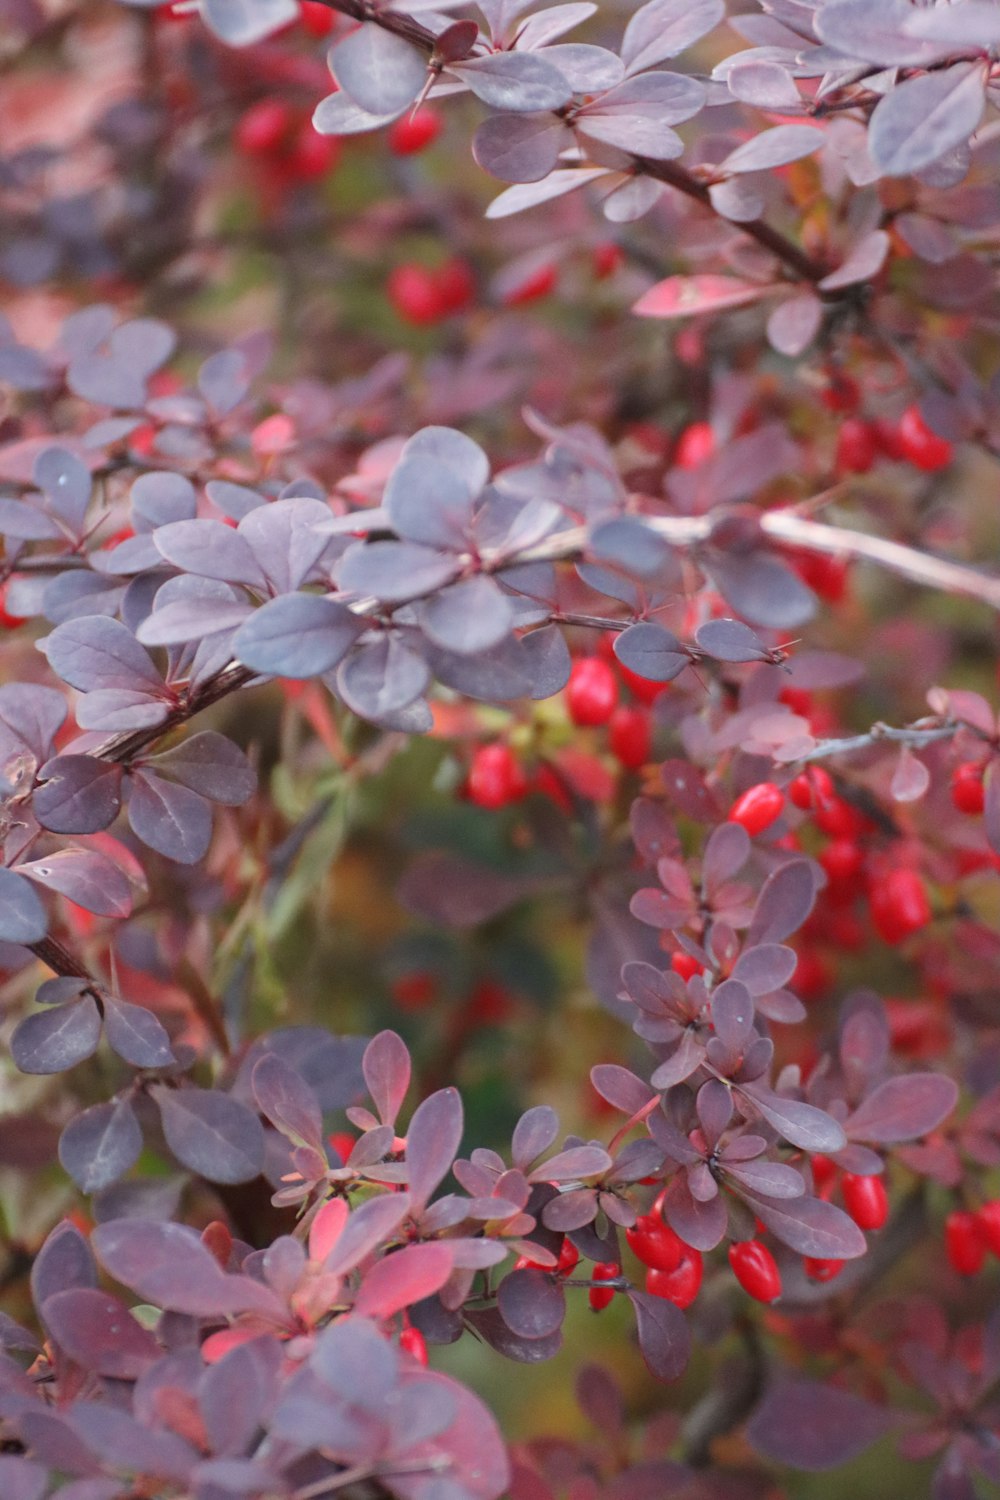 a close up of a bush with red berries